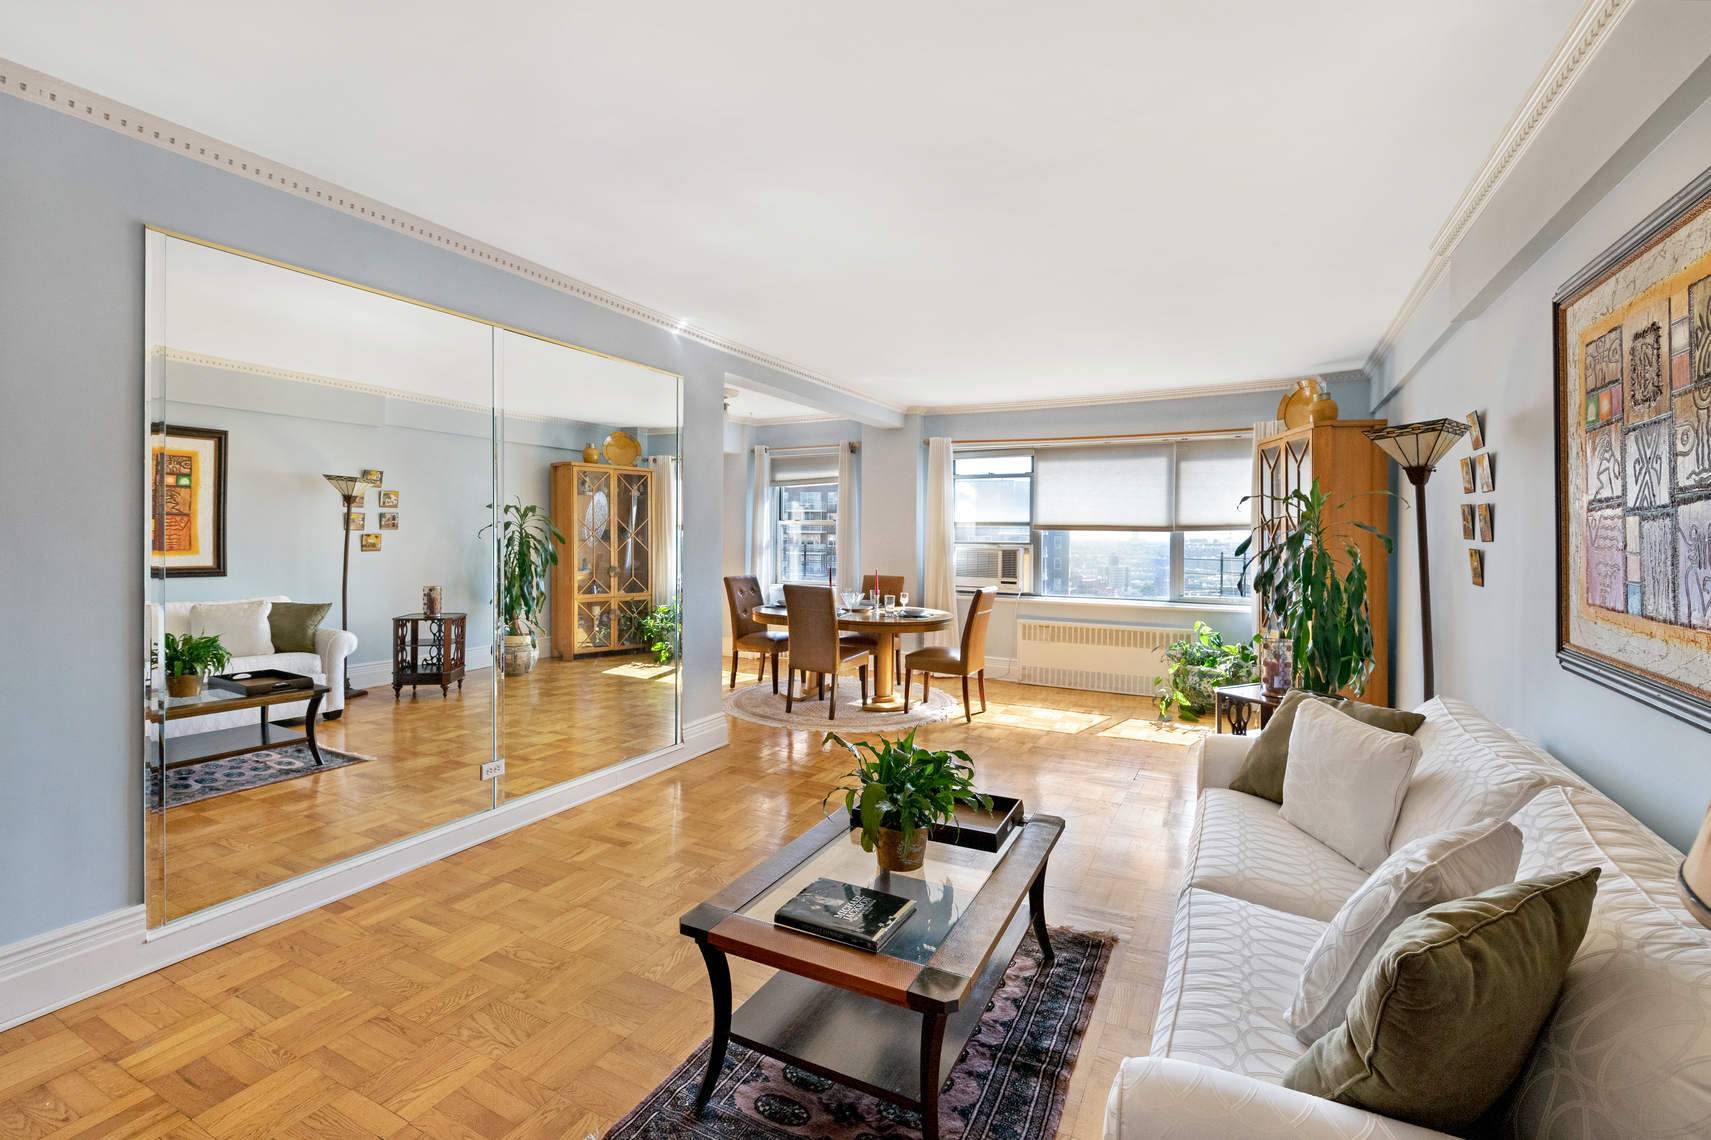 Live high above Riverdale in this top floor, corner 2 bedroom, 2 bathroom home at The Briarcliff.